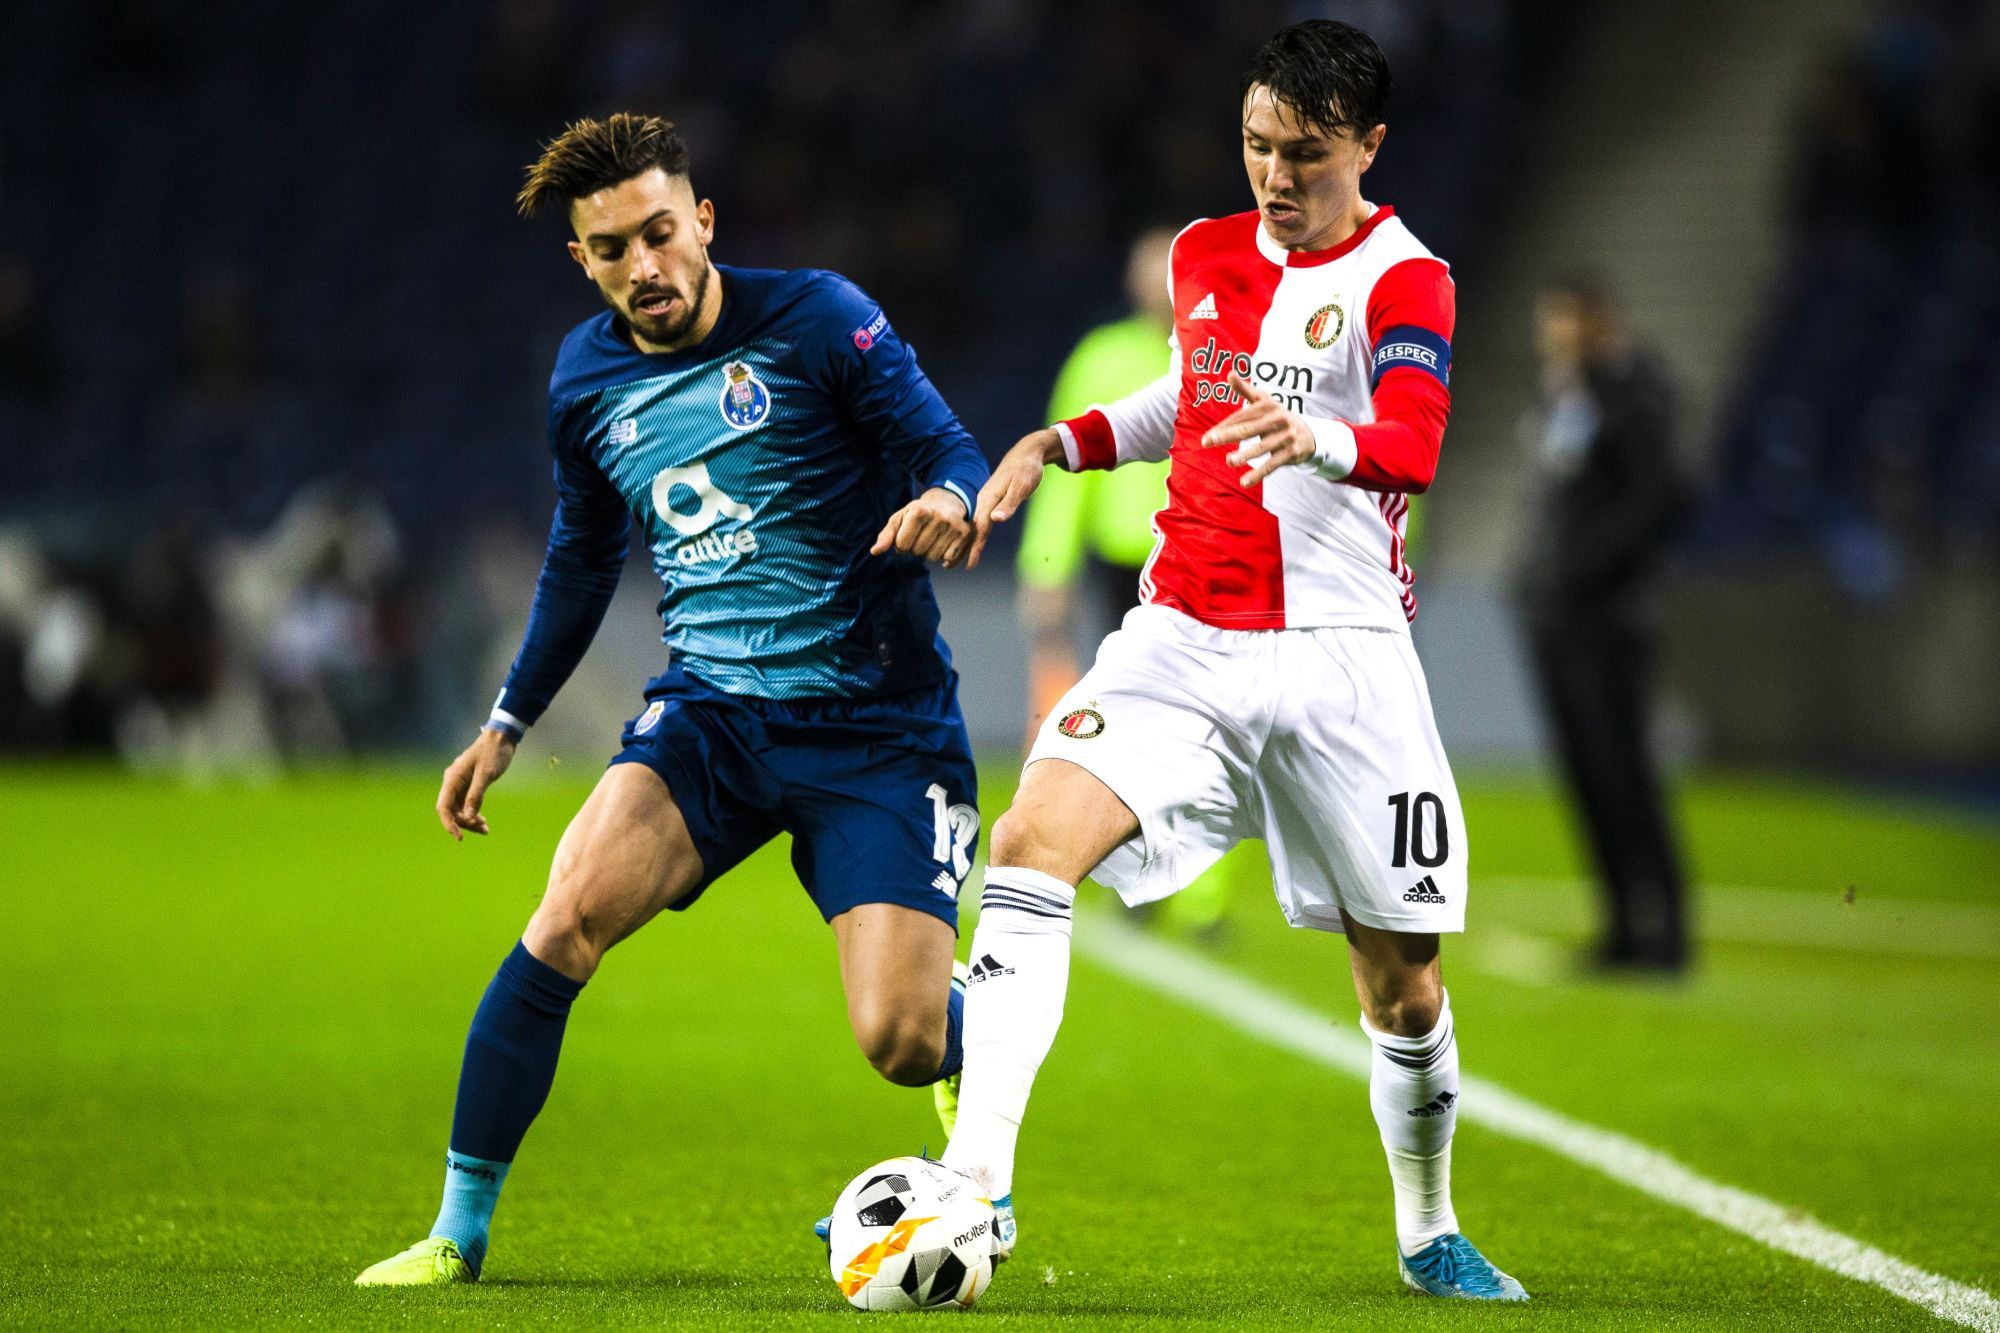 Porto, 12/12/2019 - Futebol Clube do Porto welcomed Feyenoord this afternoon at Estádio do Dragão, in matchday 6 of Group G of the Europa League 2019/20 .. Steven Berghuis, Alex Telles (Pedro Correia / Global Images) 
Photo by Icon Sport - Estadio do Dragao - Porto (Portugal)